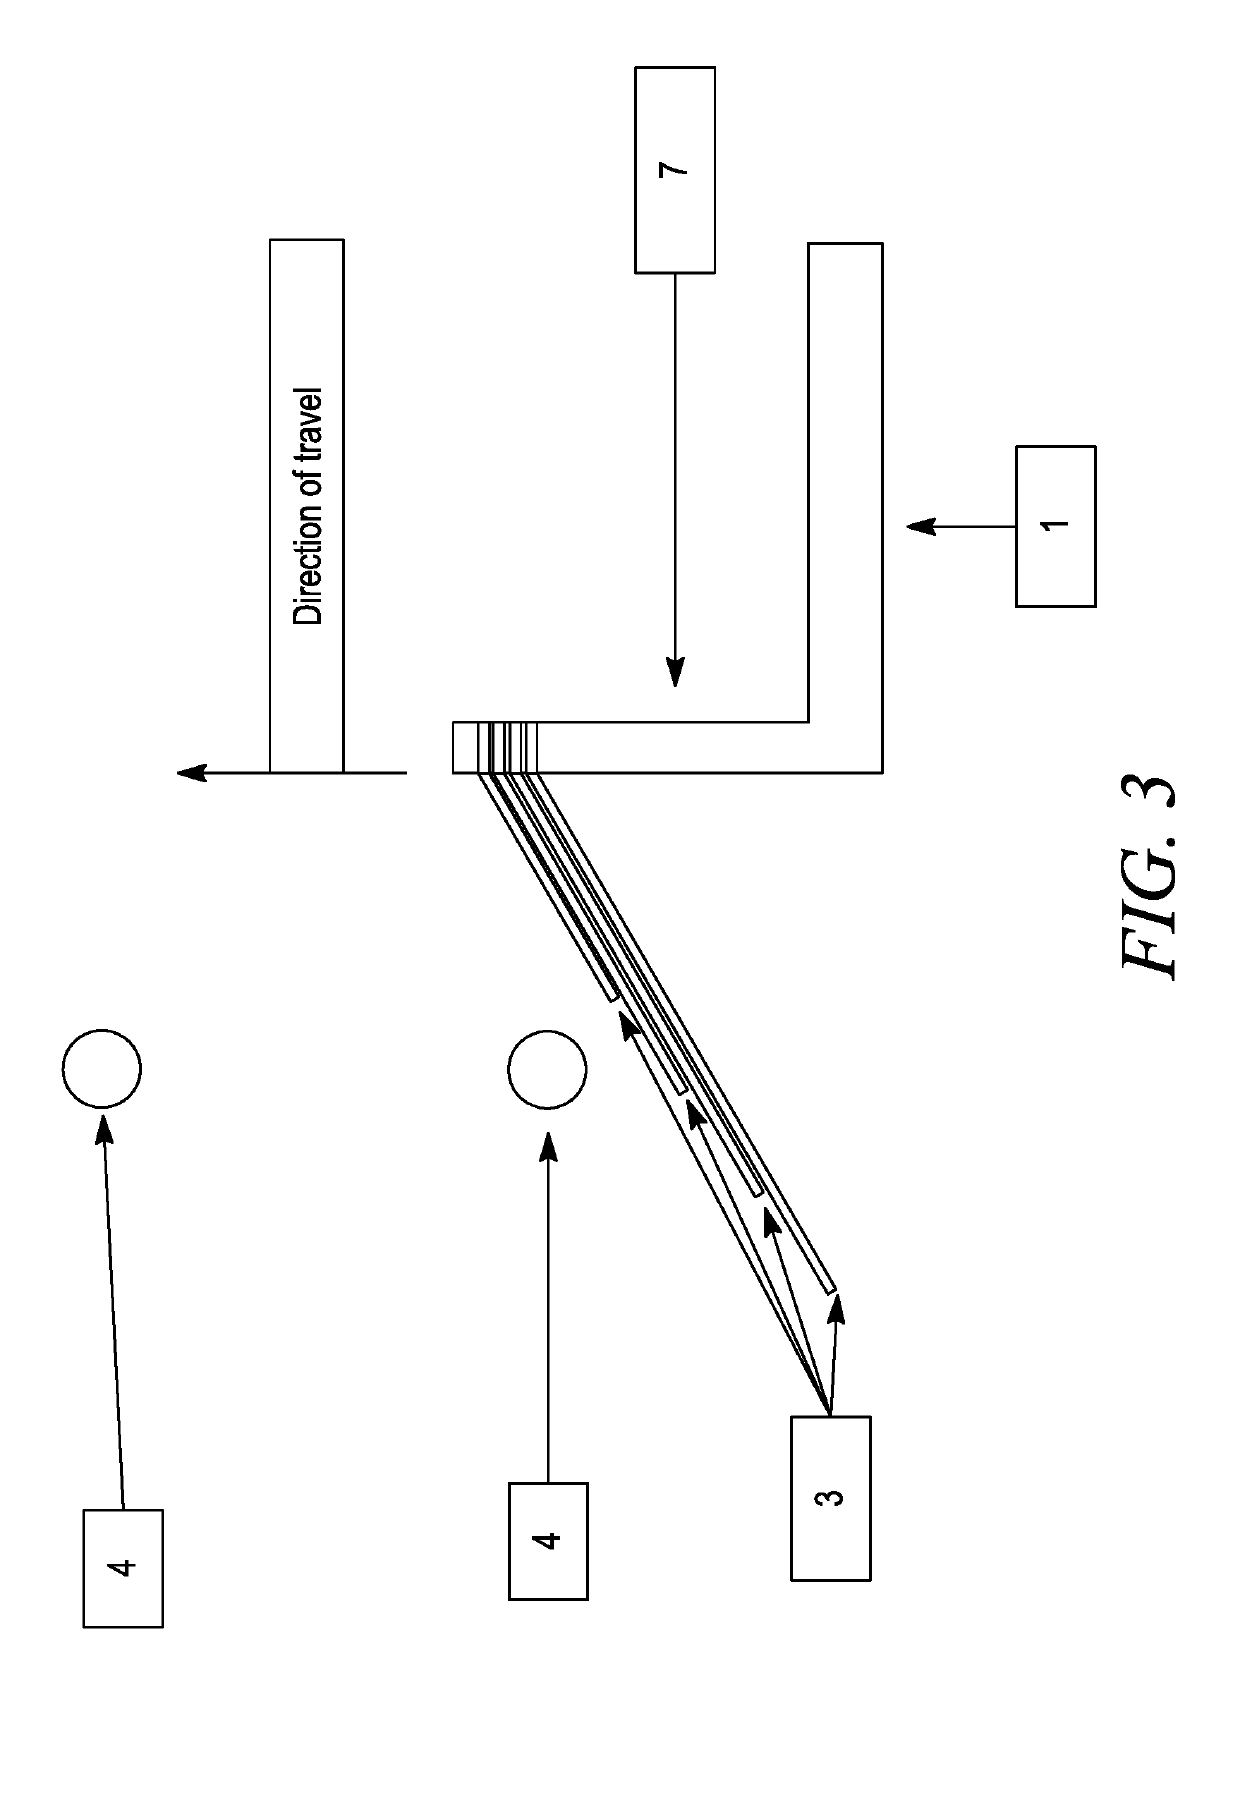 Non-destructive stalk and root contact sensor with variable rate tensioner